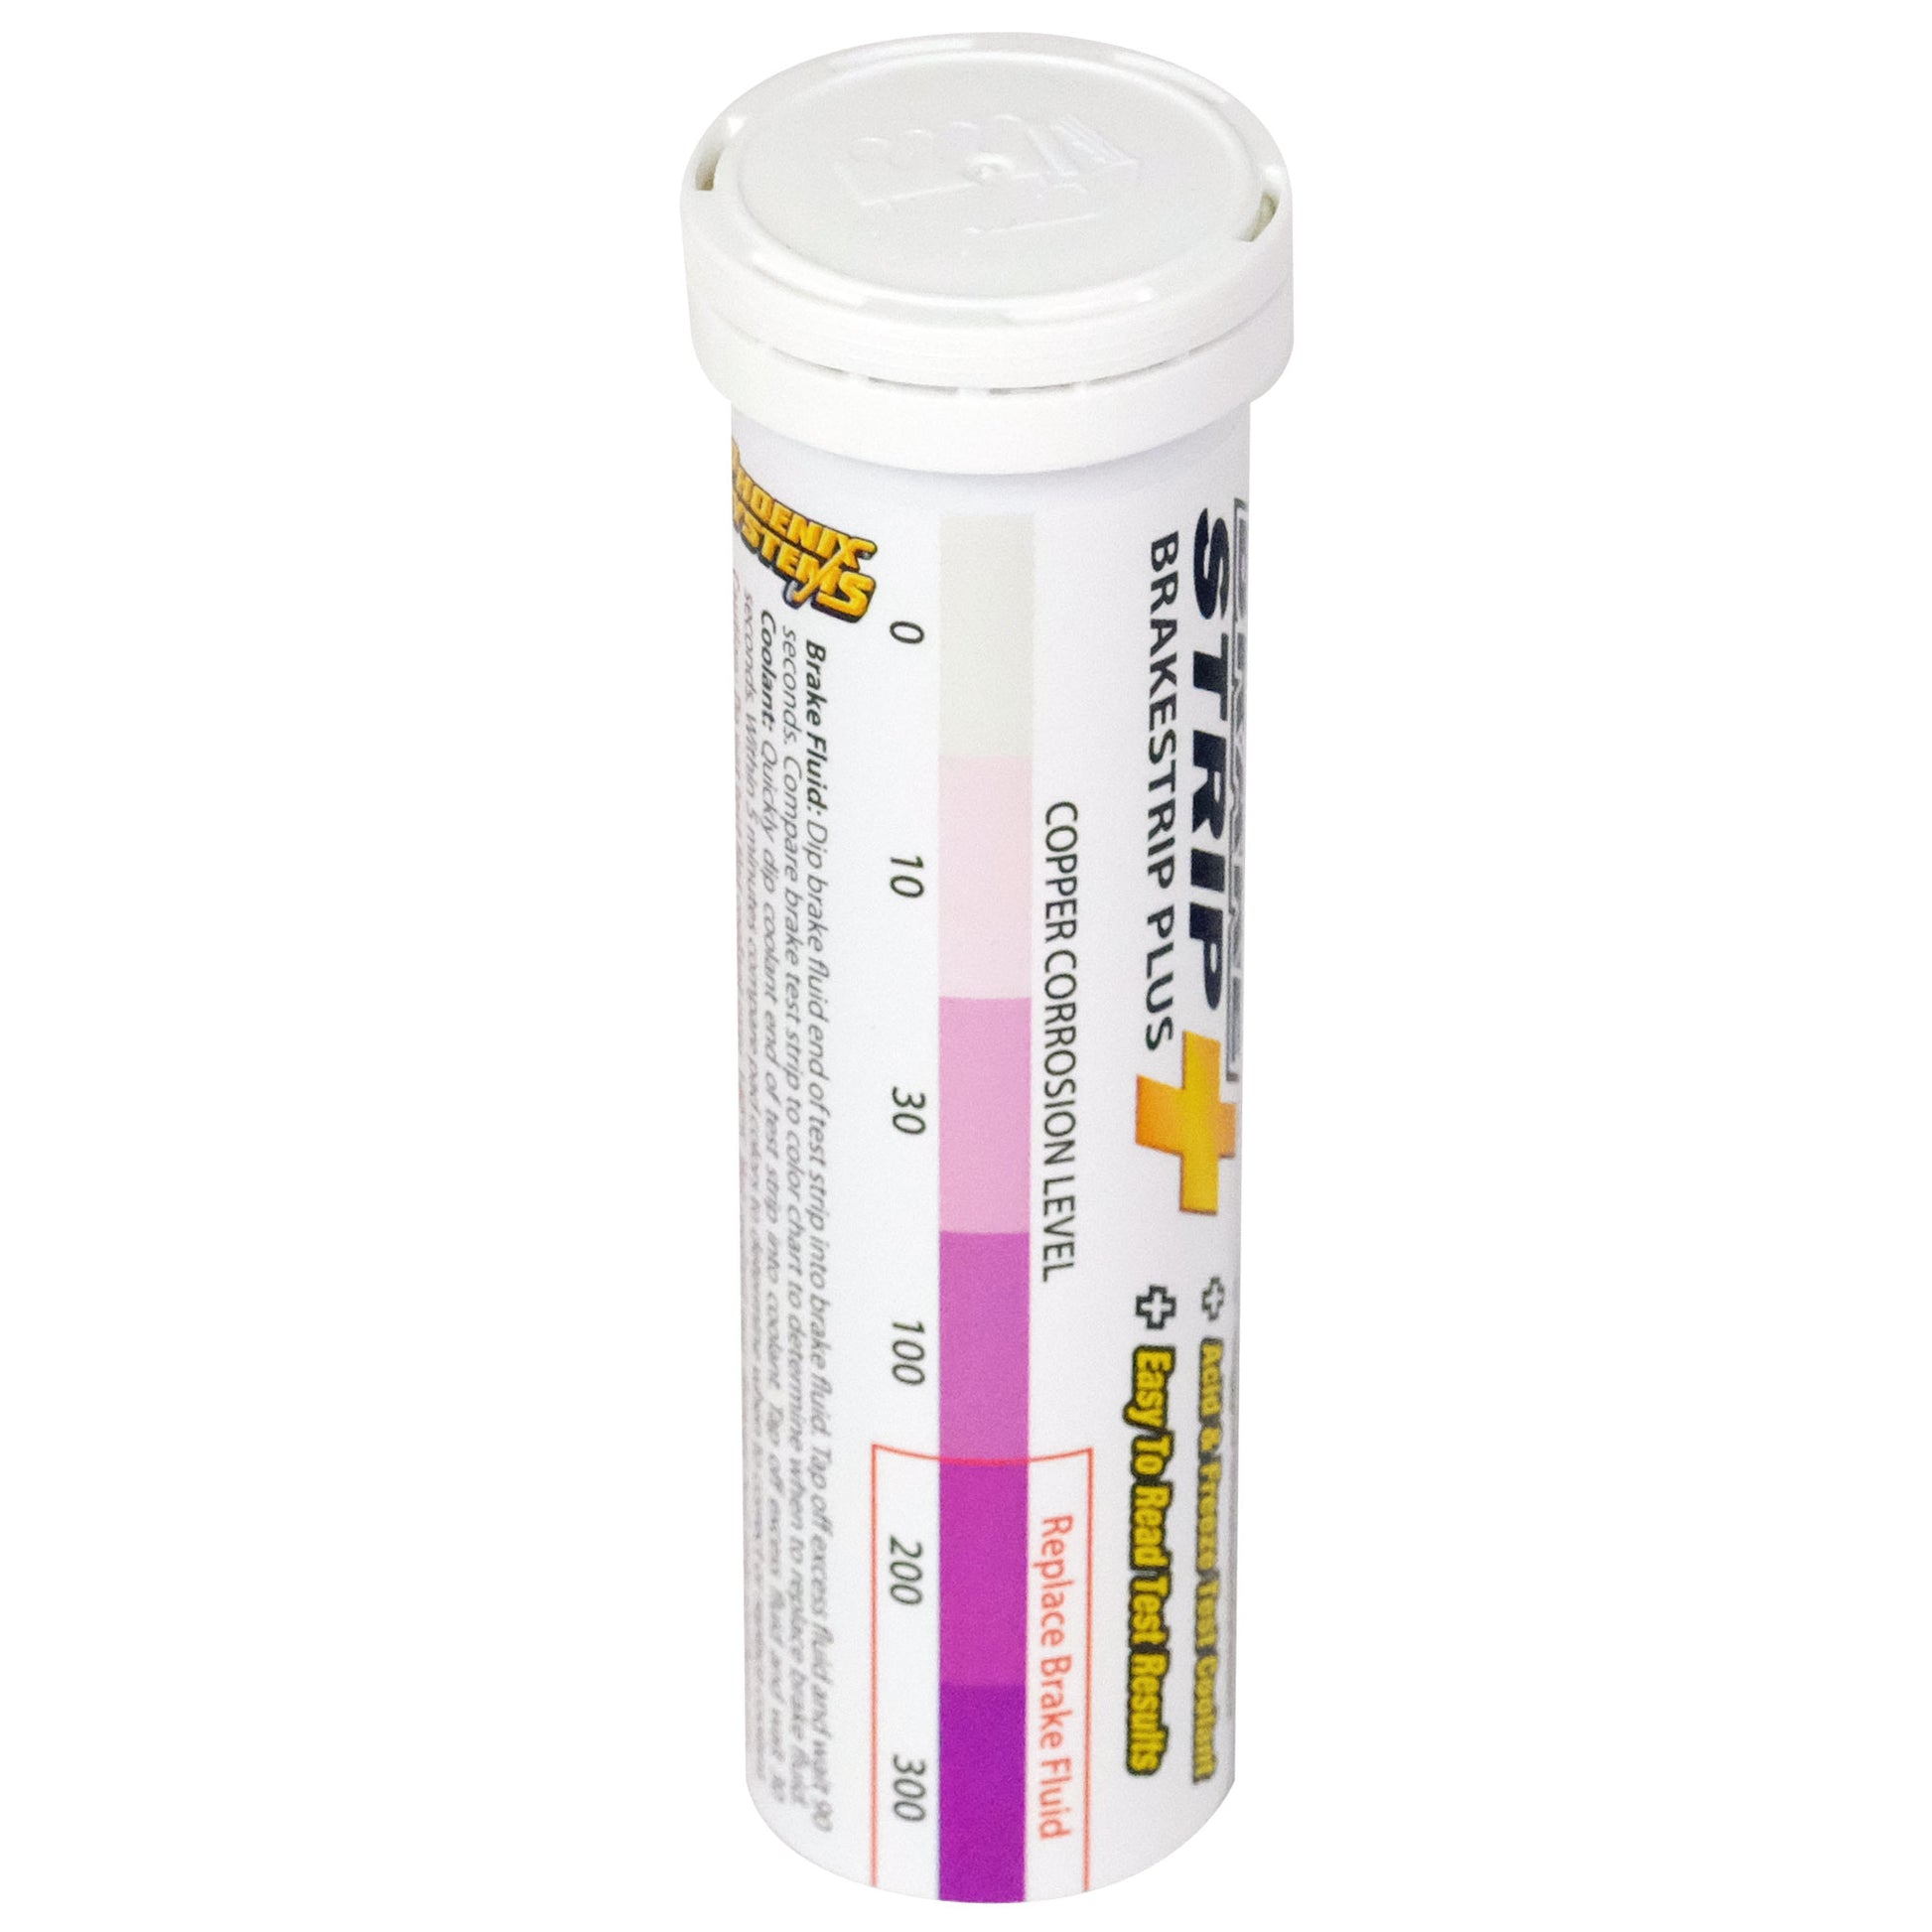 The image depicts a BrakeStrip Plus coolant test kit, a tube containing double-ended test strips for checking a vehicle's coolant condition. A label on the tube displays a color chart to interpret test results and likely warnings about hot coolant.